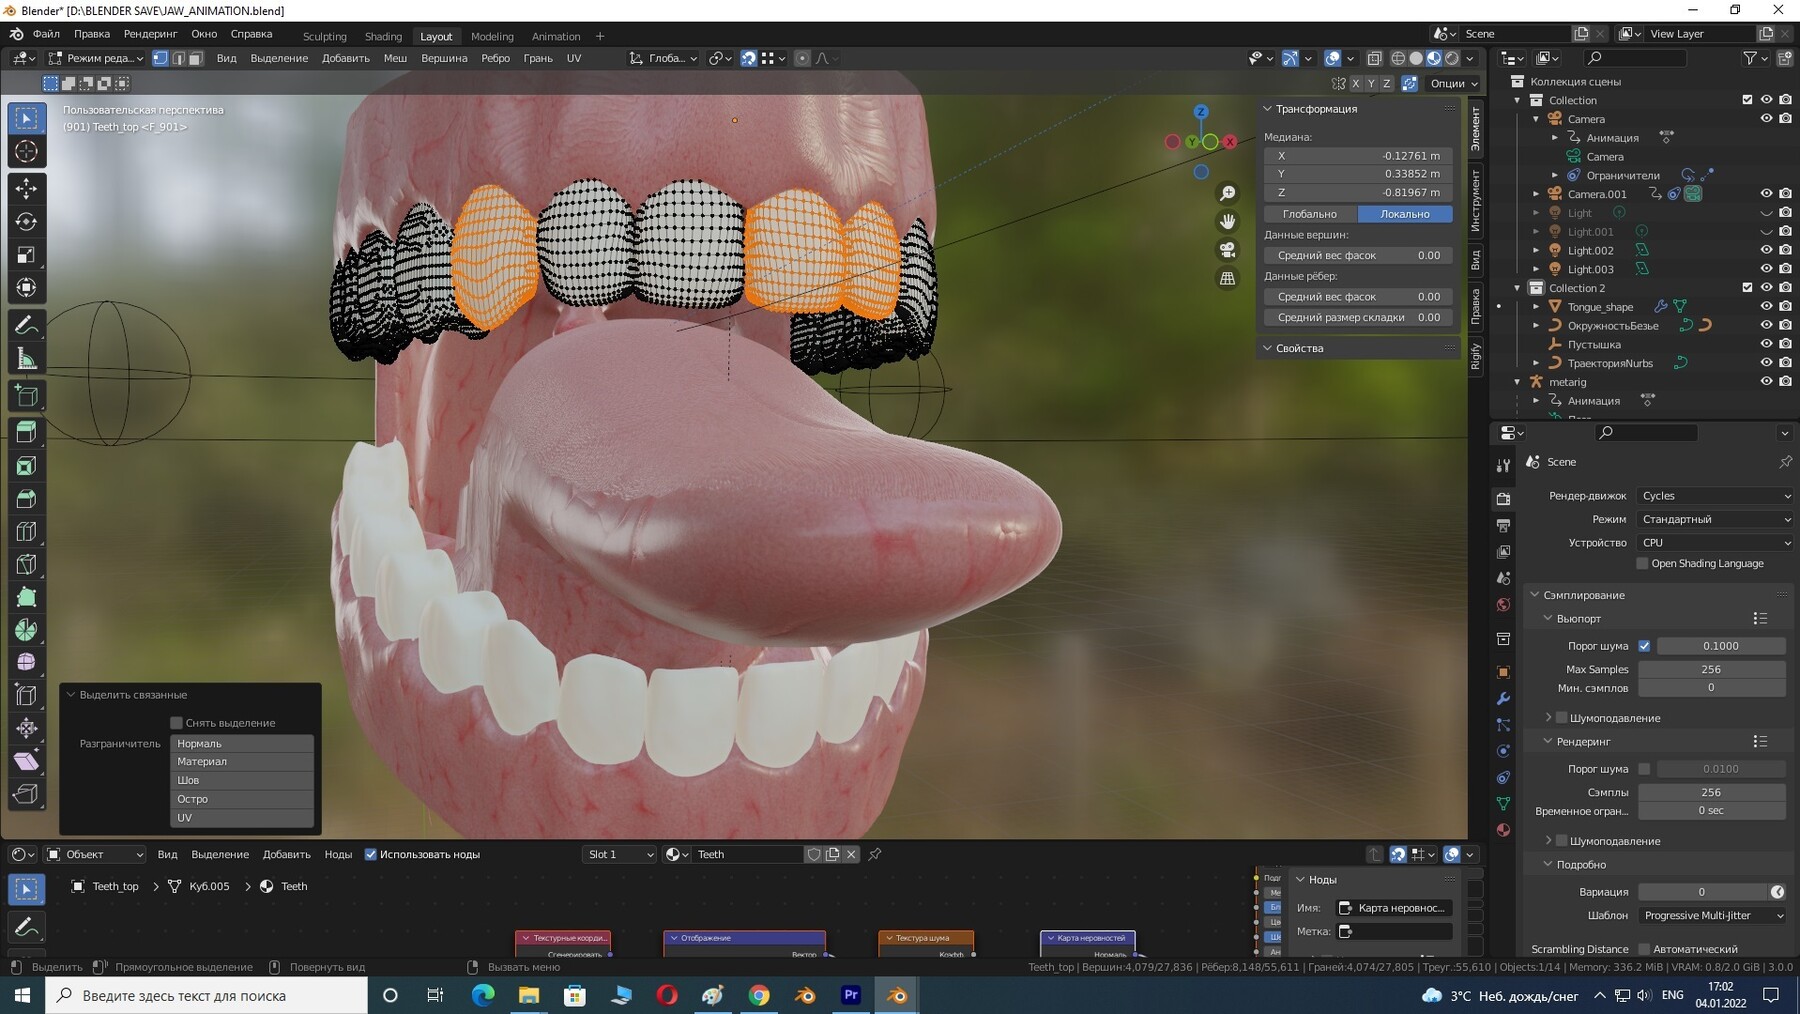 ArtStation - Realistic human jaw with teeth and tongue | Game Assets